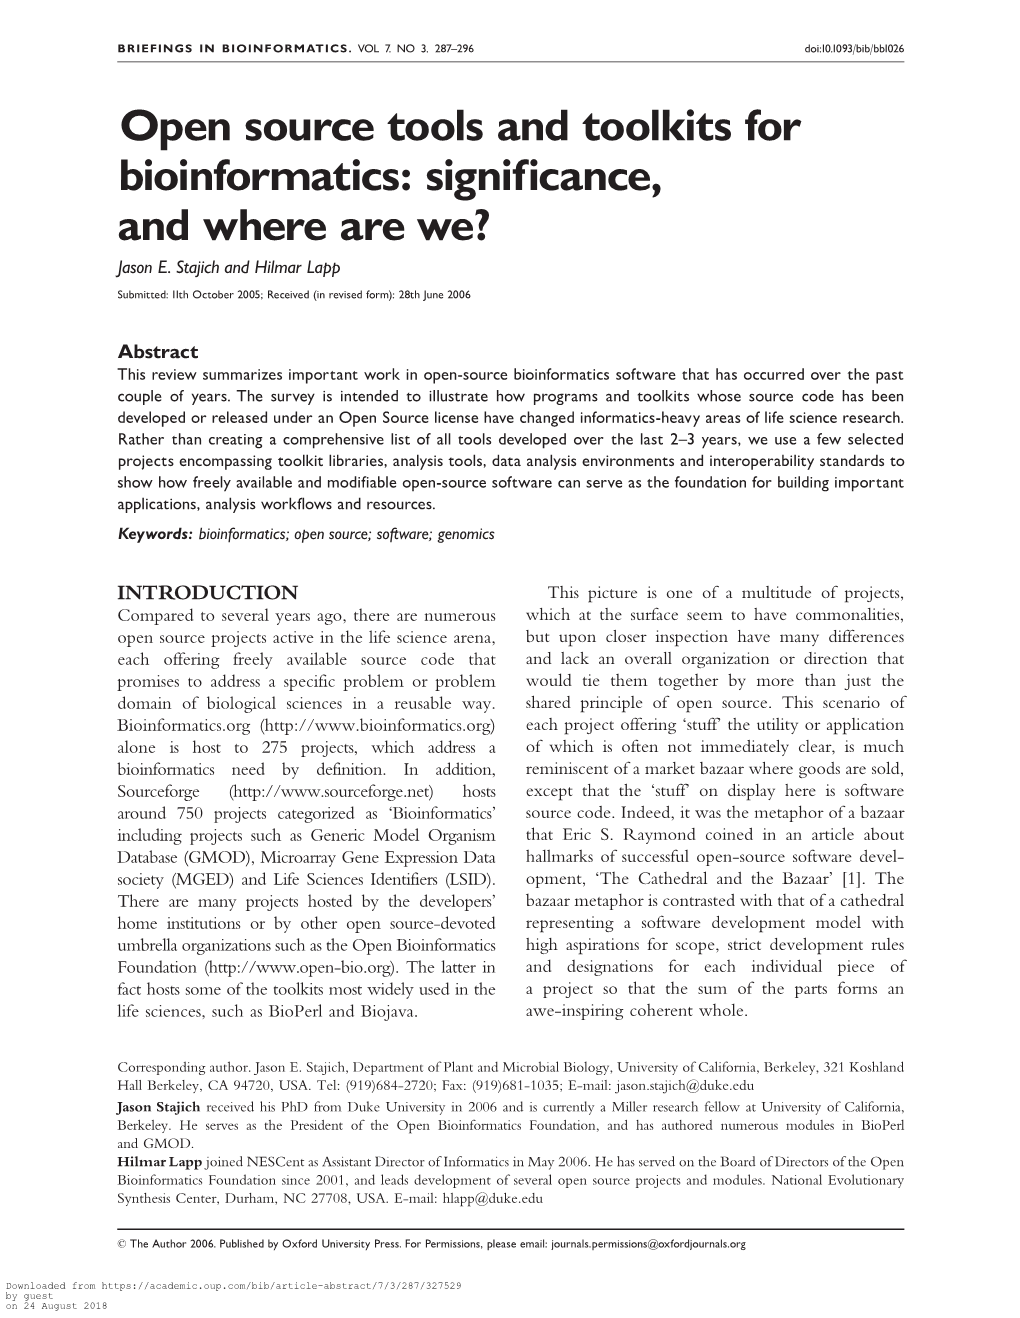 Open Source Tools and Toolkits for Bioinformatics: Significance, and Where Are We? Jasone.Stajichandhilmarlapp